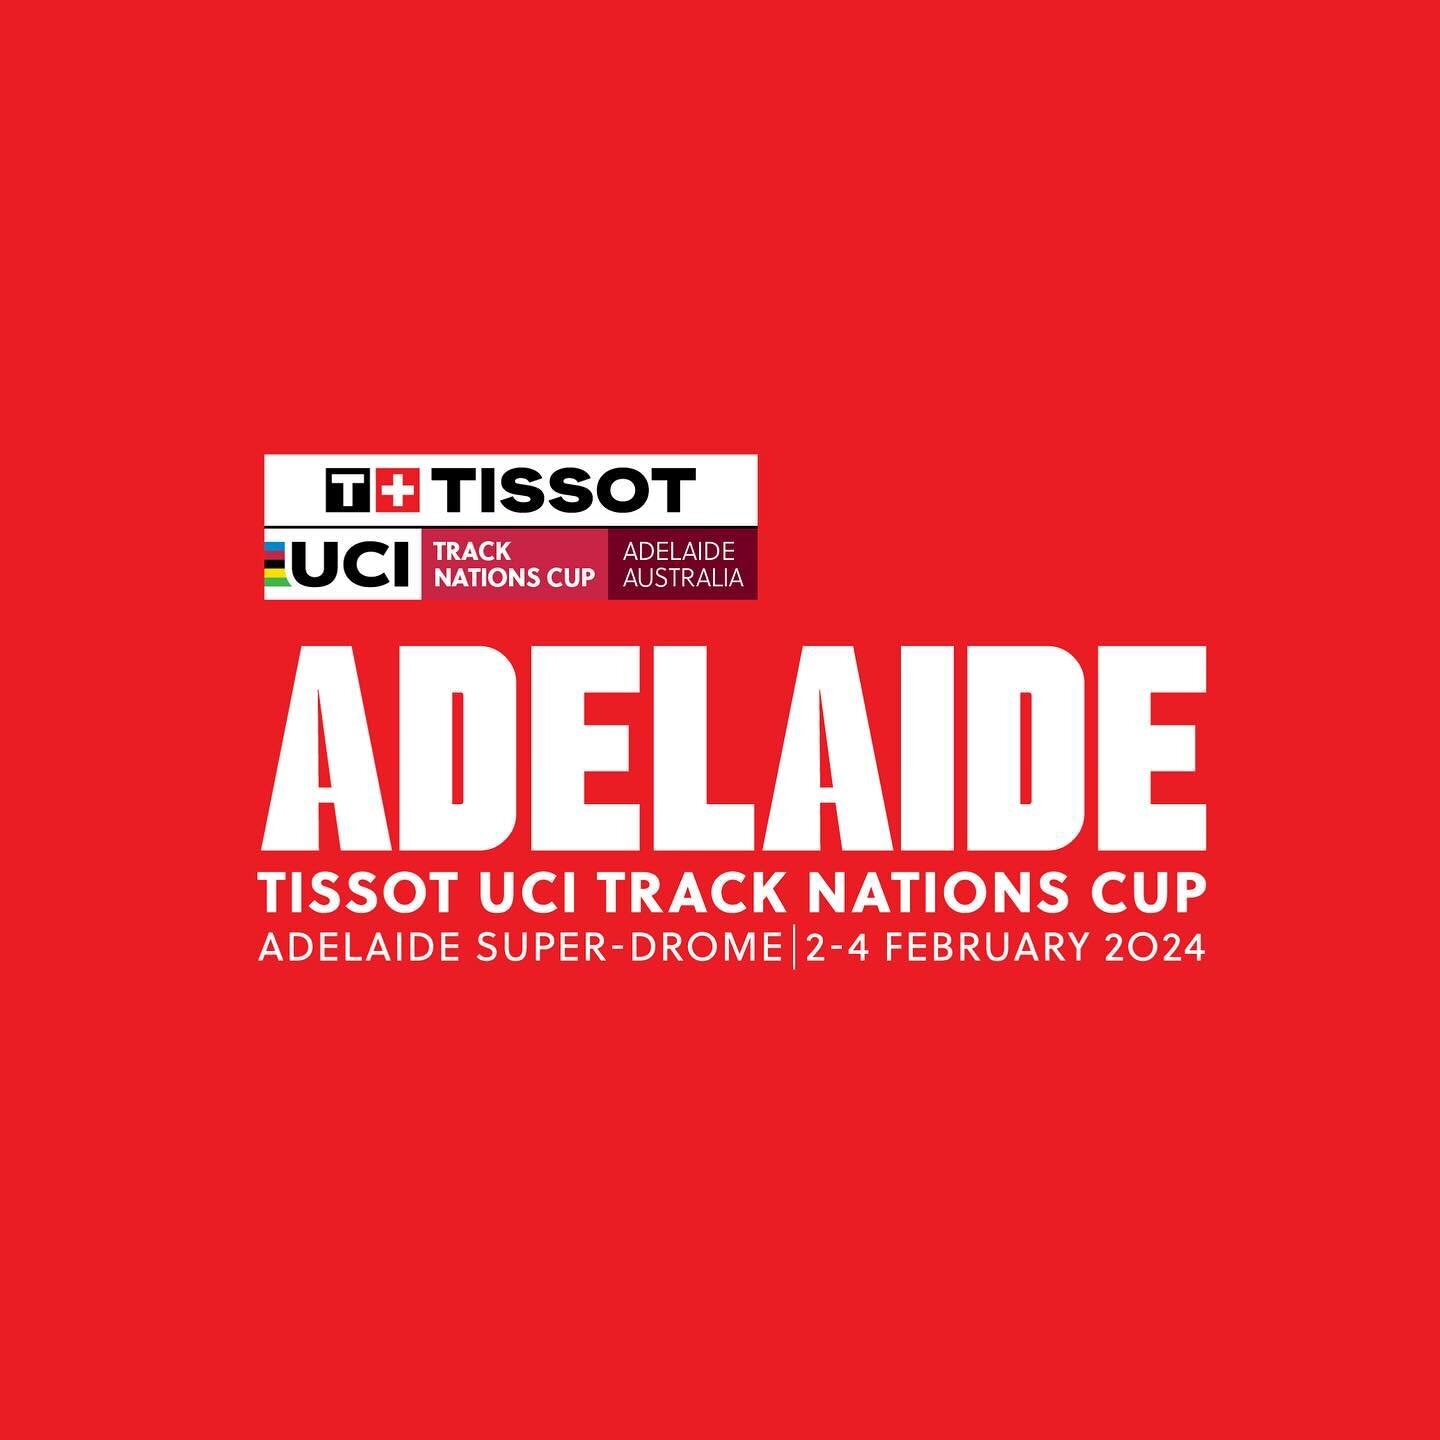 Adelaide will host the opening round of the 2024 Tissot UCI Track Nations Cup, a key event for top track cyclists preparing for the Paris 2024 Olympics. We were excited to collaborate once more with AusCycling in crafting the brand and tone for the A